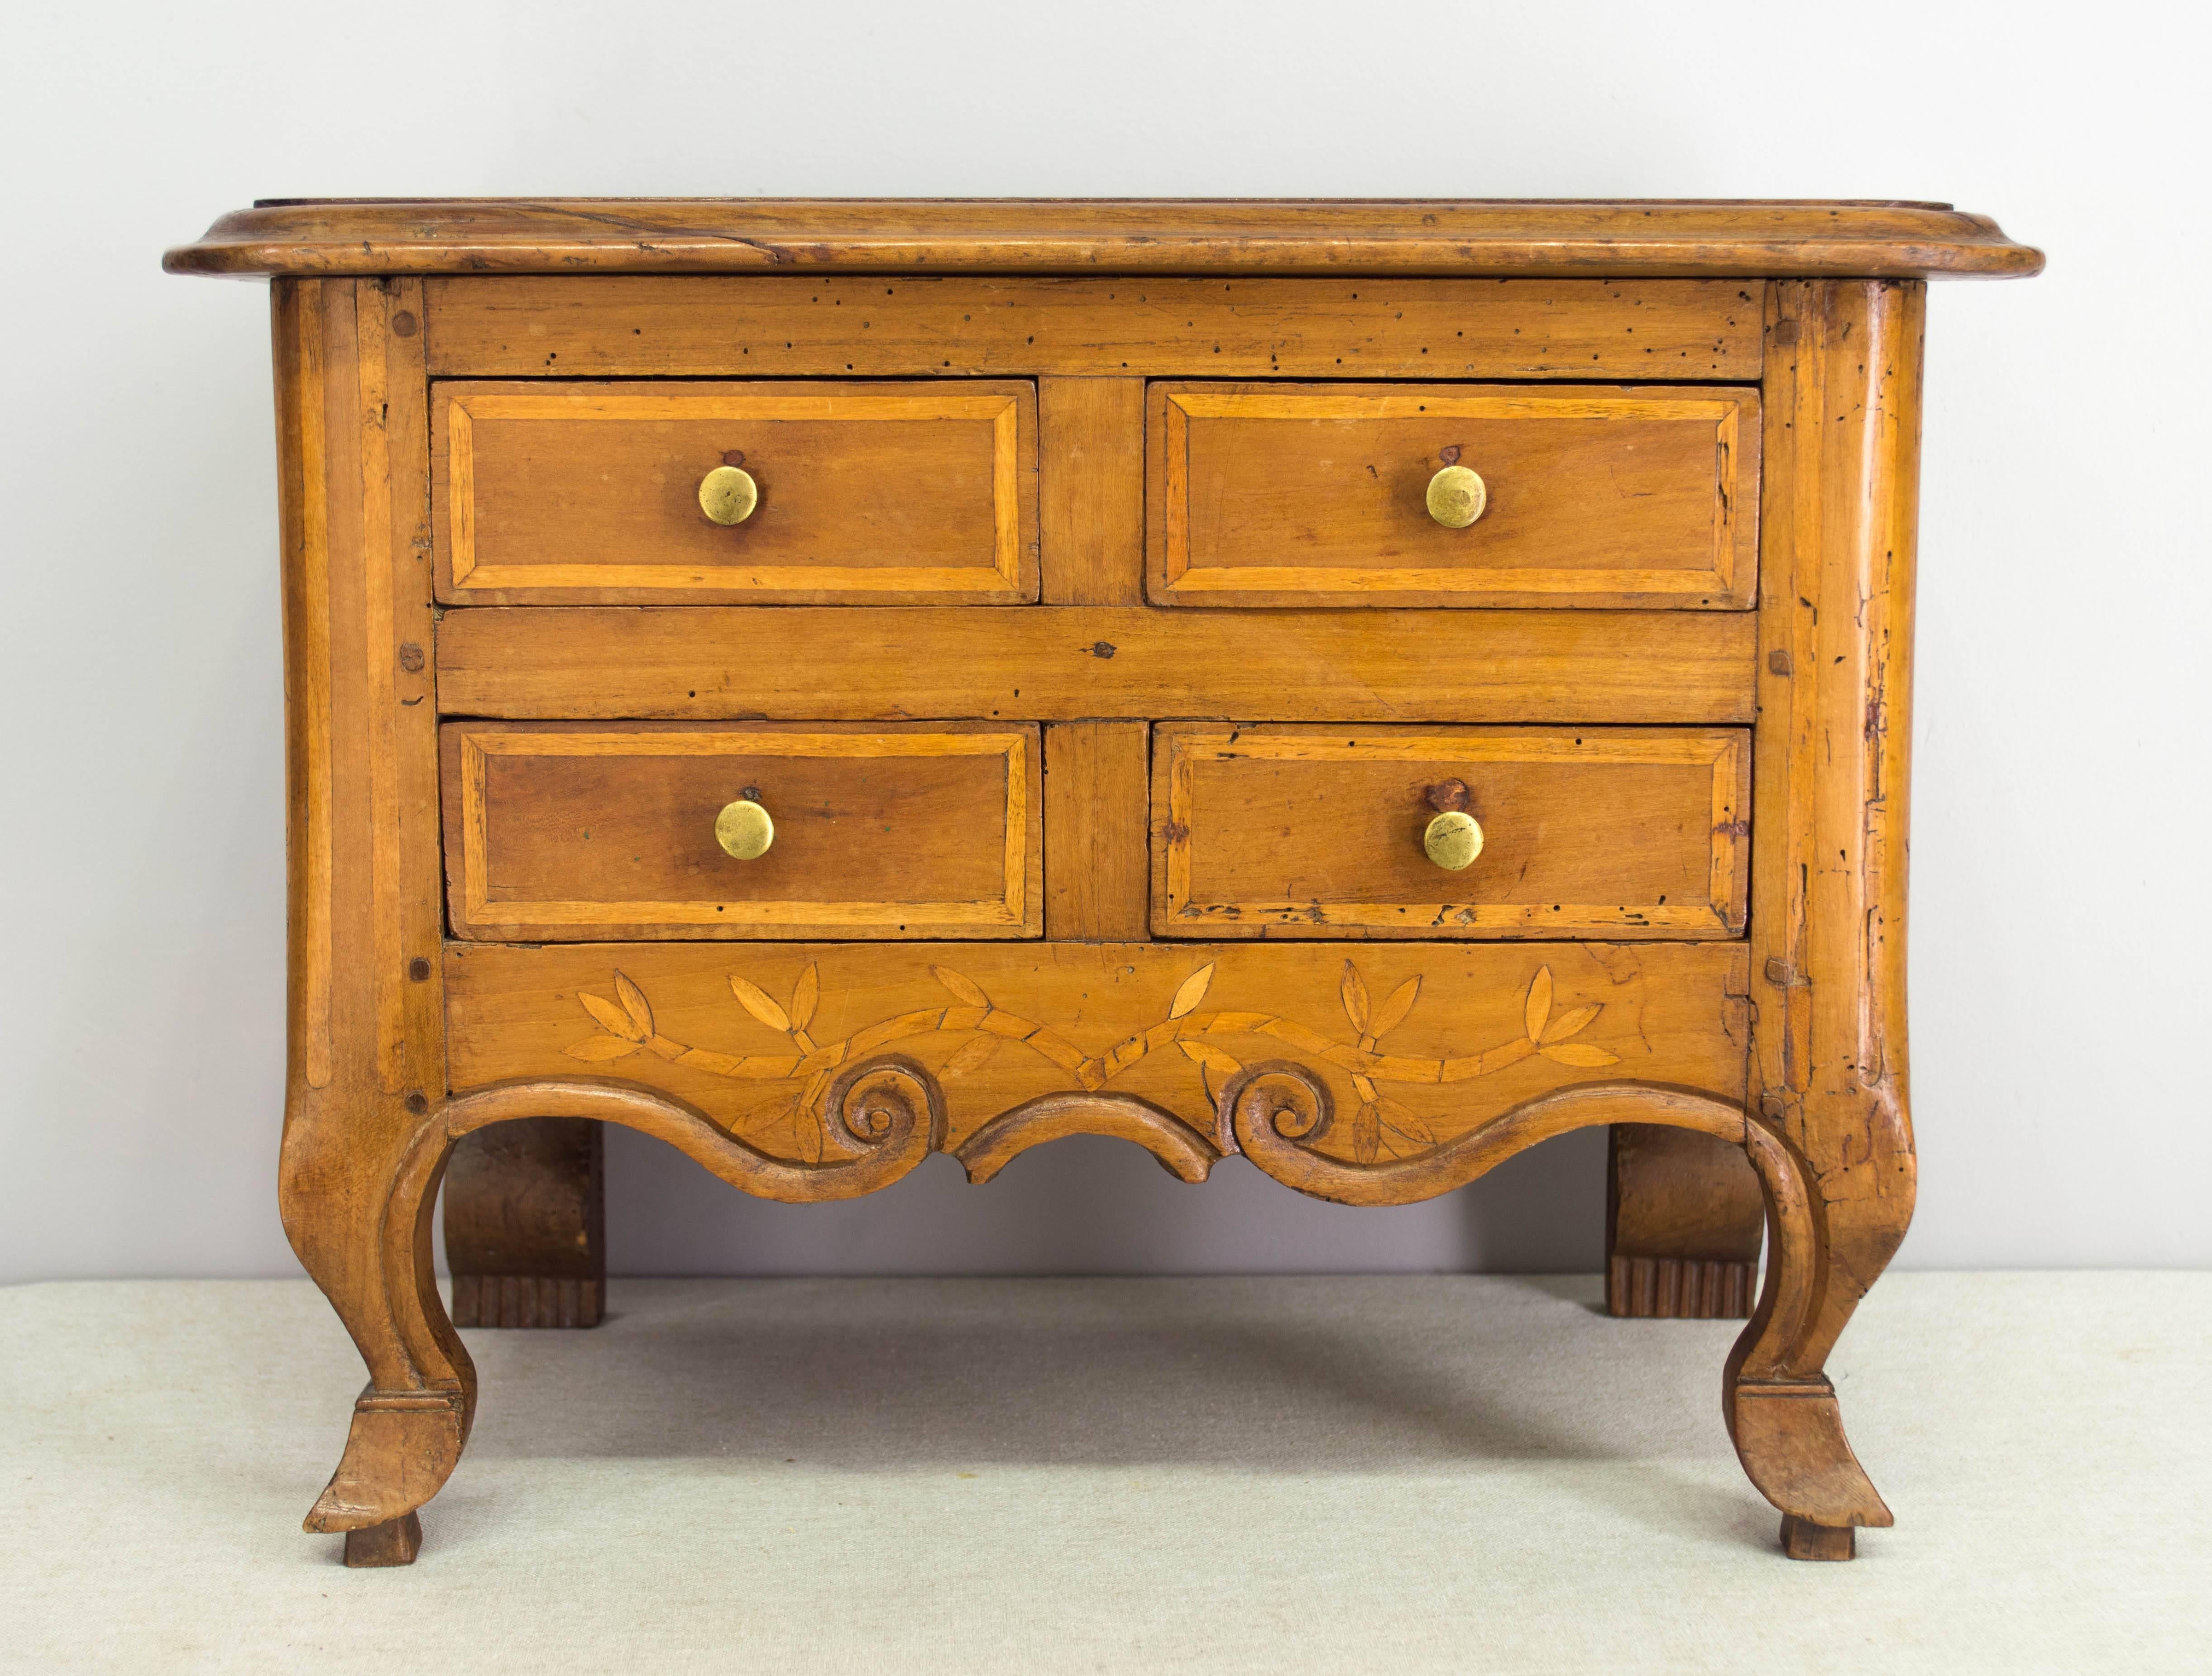 An early 19th century Louis XV style miniature commode, made of cherry with four dovetailed drawers. Nice details to this little chest including curved front corners and legs ending in hoof feet. Carved apron with inlaid vine decoration. Waxed